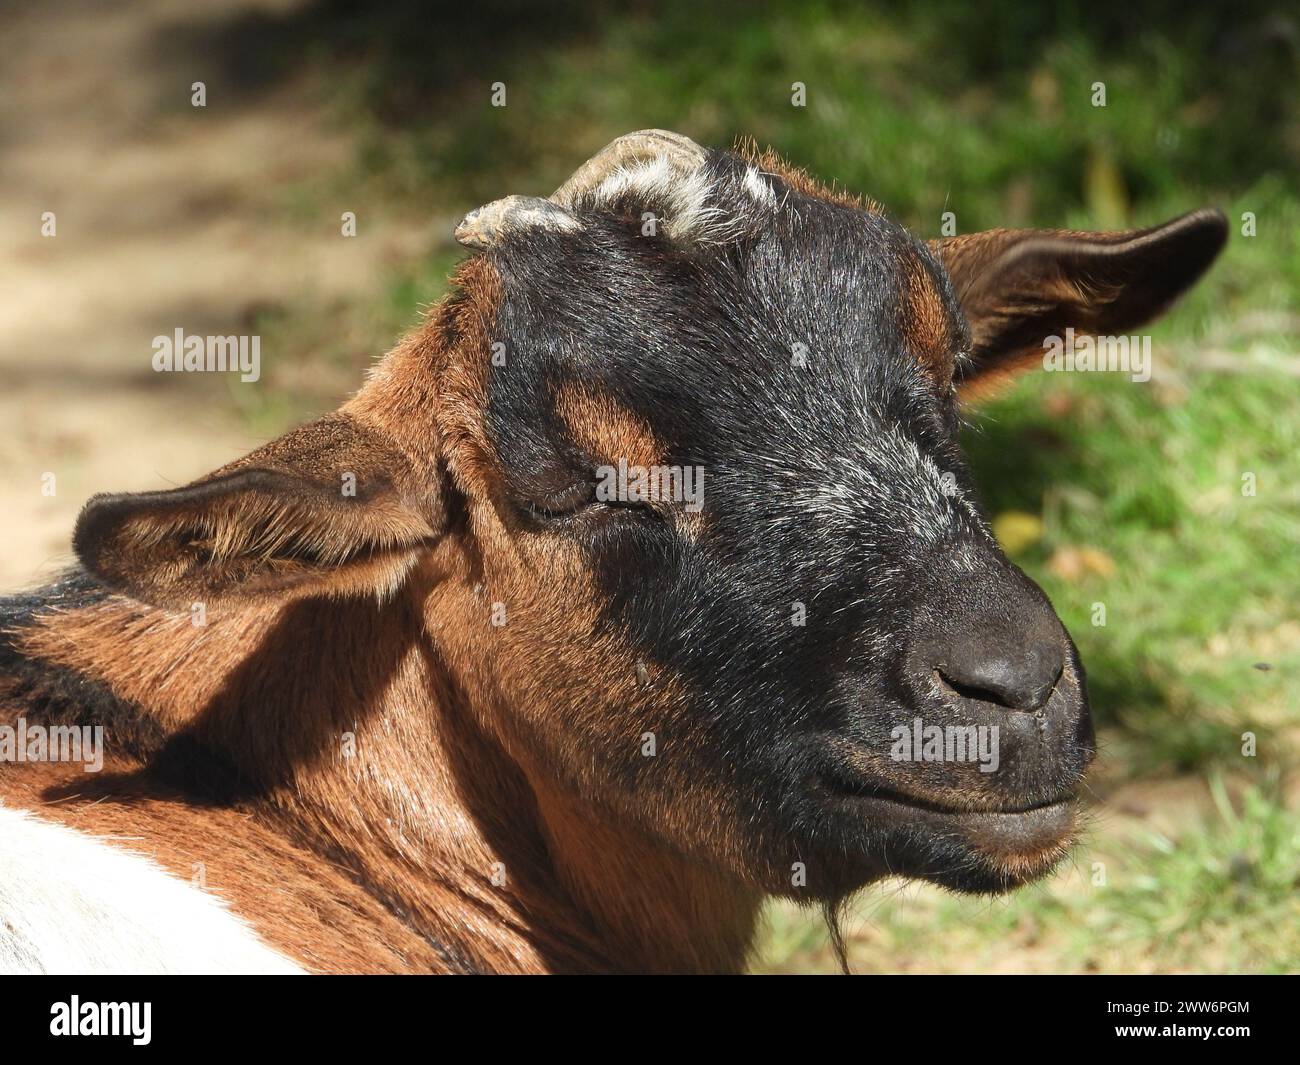 A curious goat facing the camera with its head tilted back Stock Photo